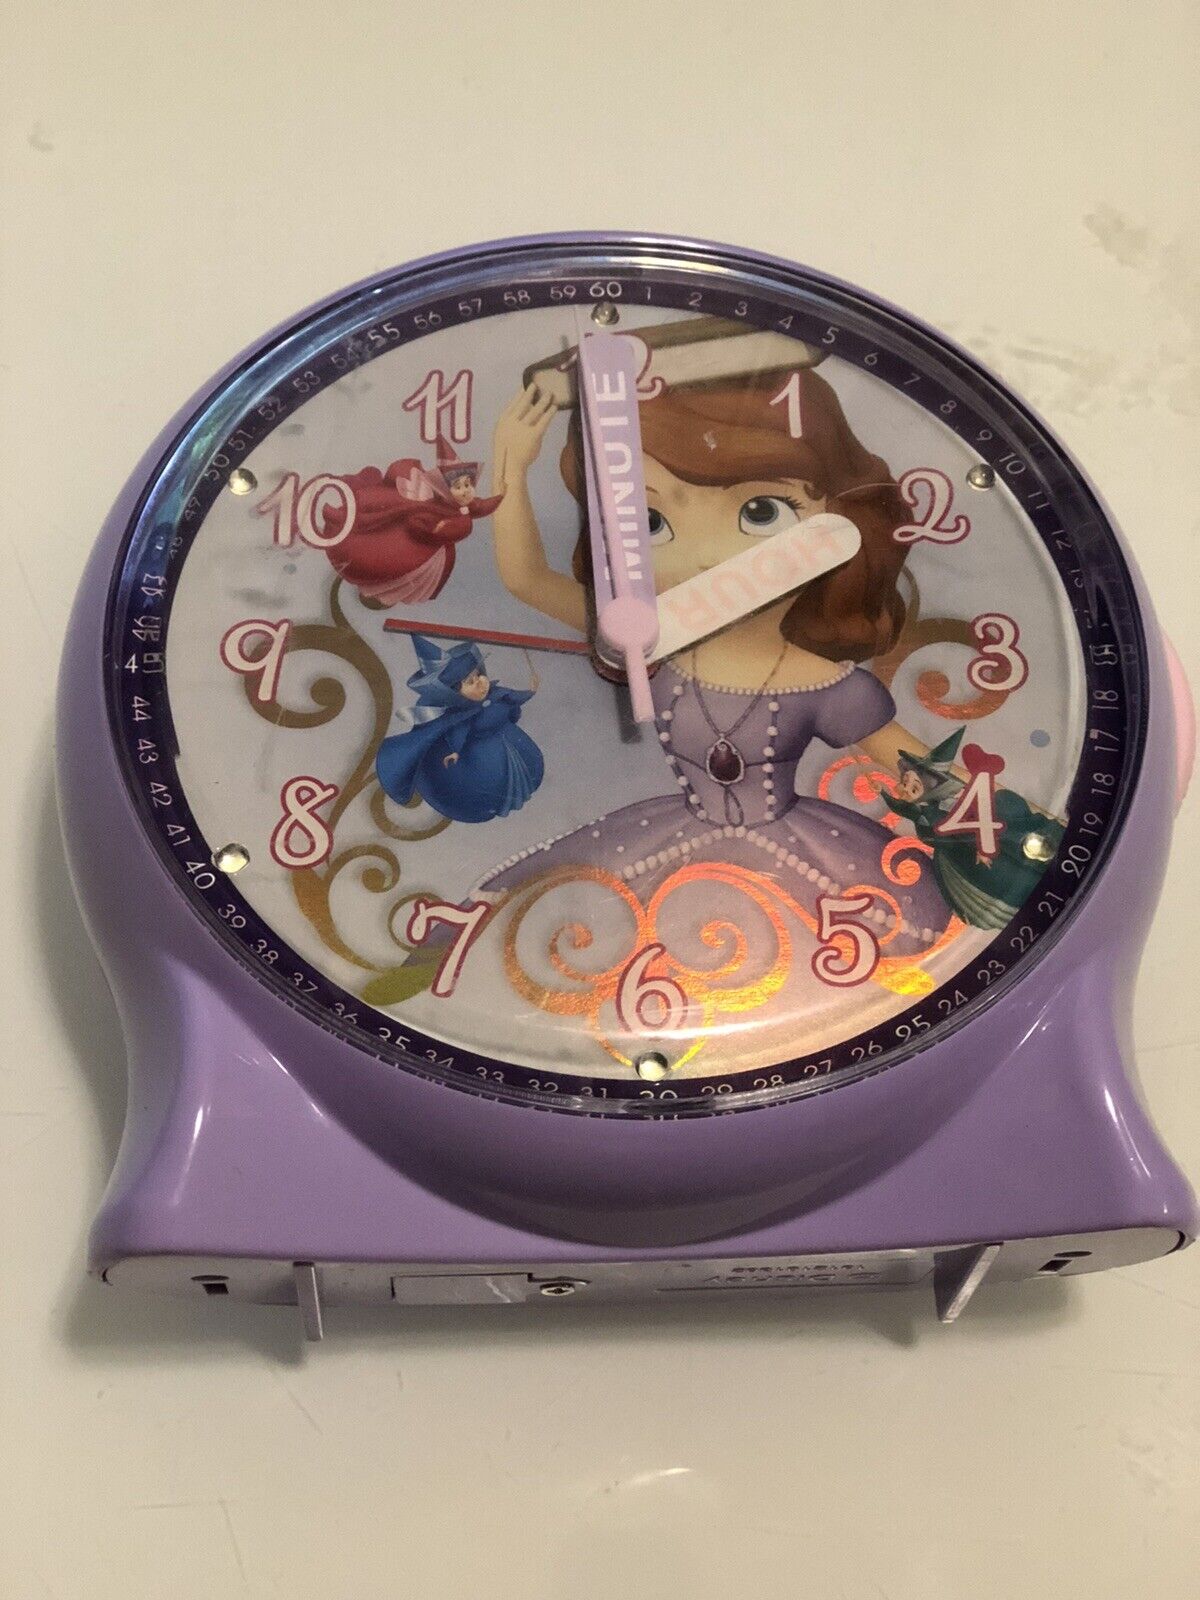 Sofia the First Alarm Clock Vintage Disney teaching time learning - Tested Works